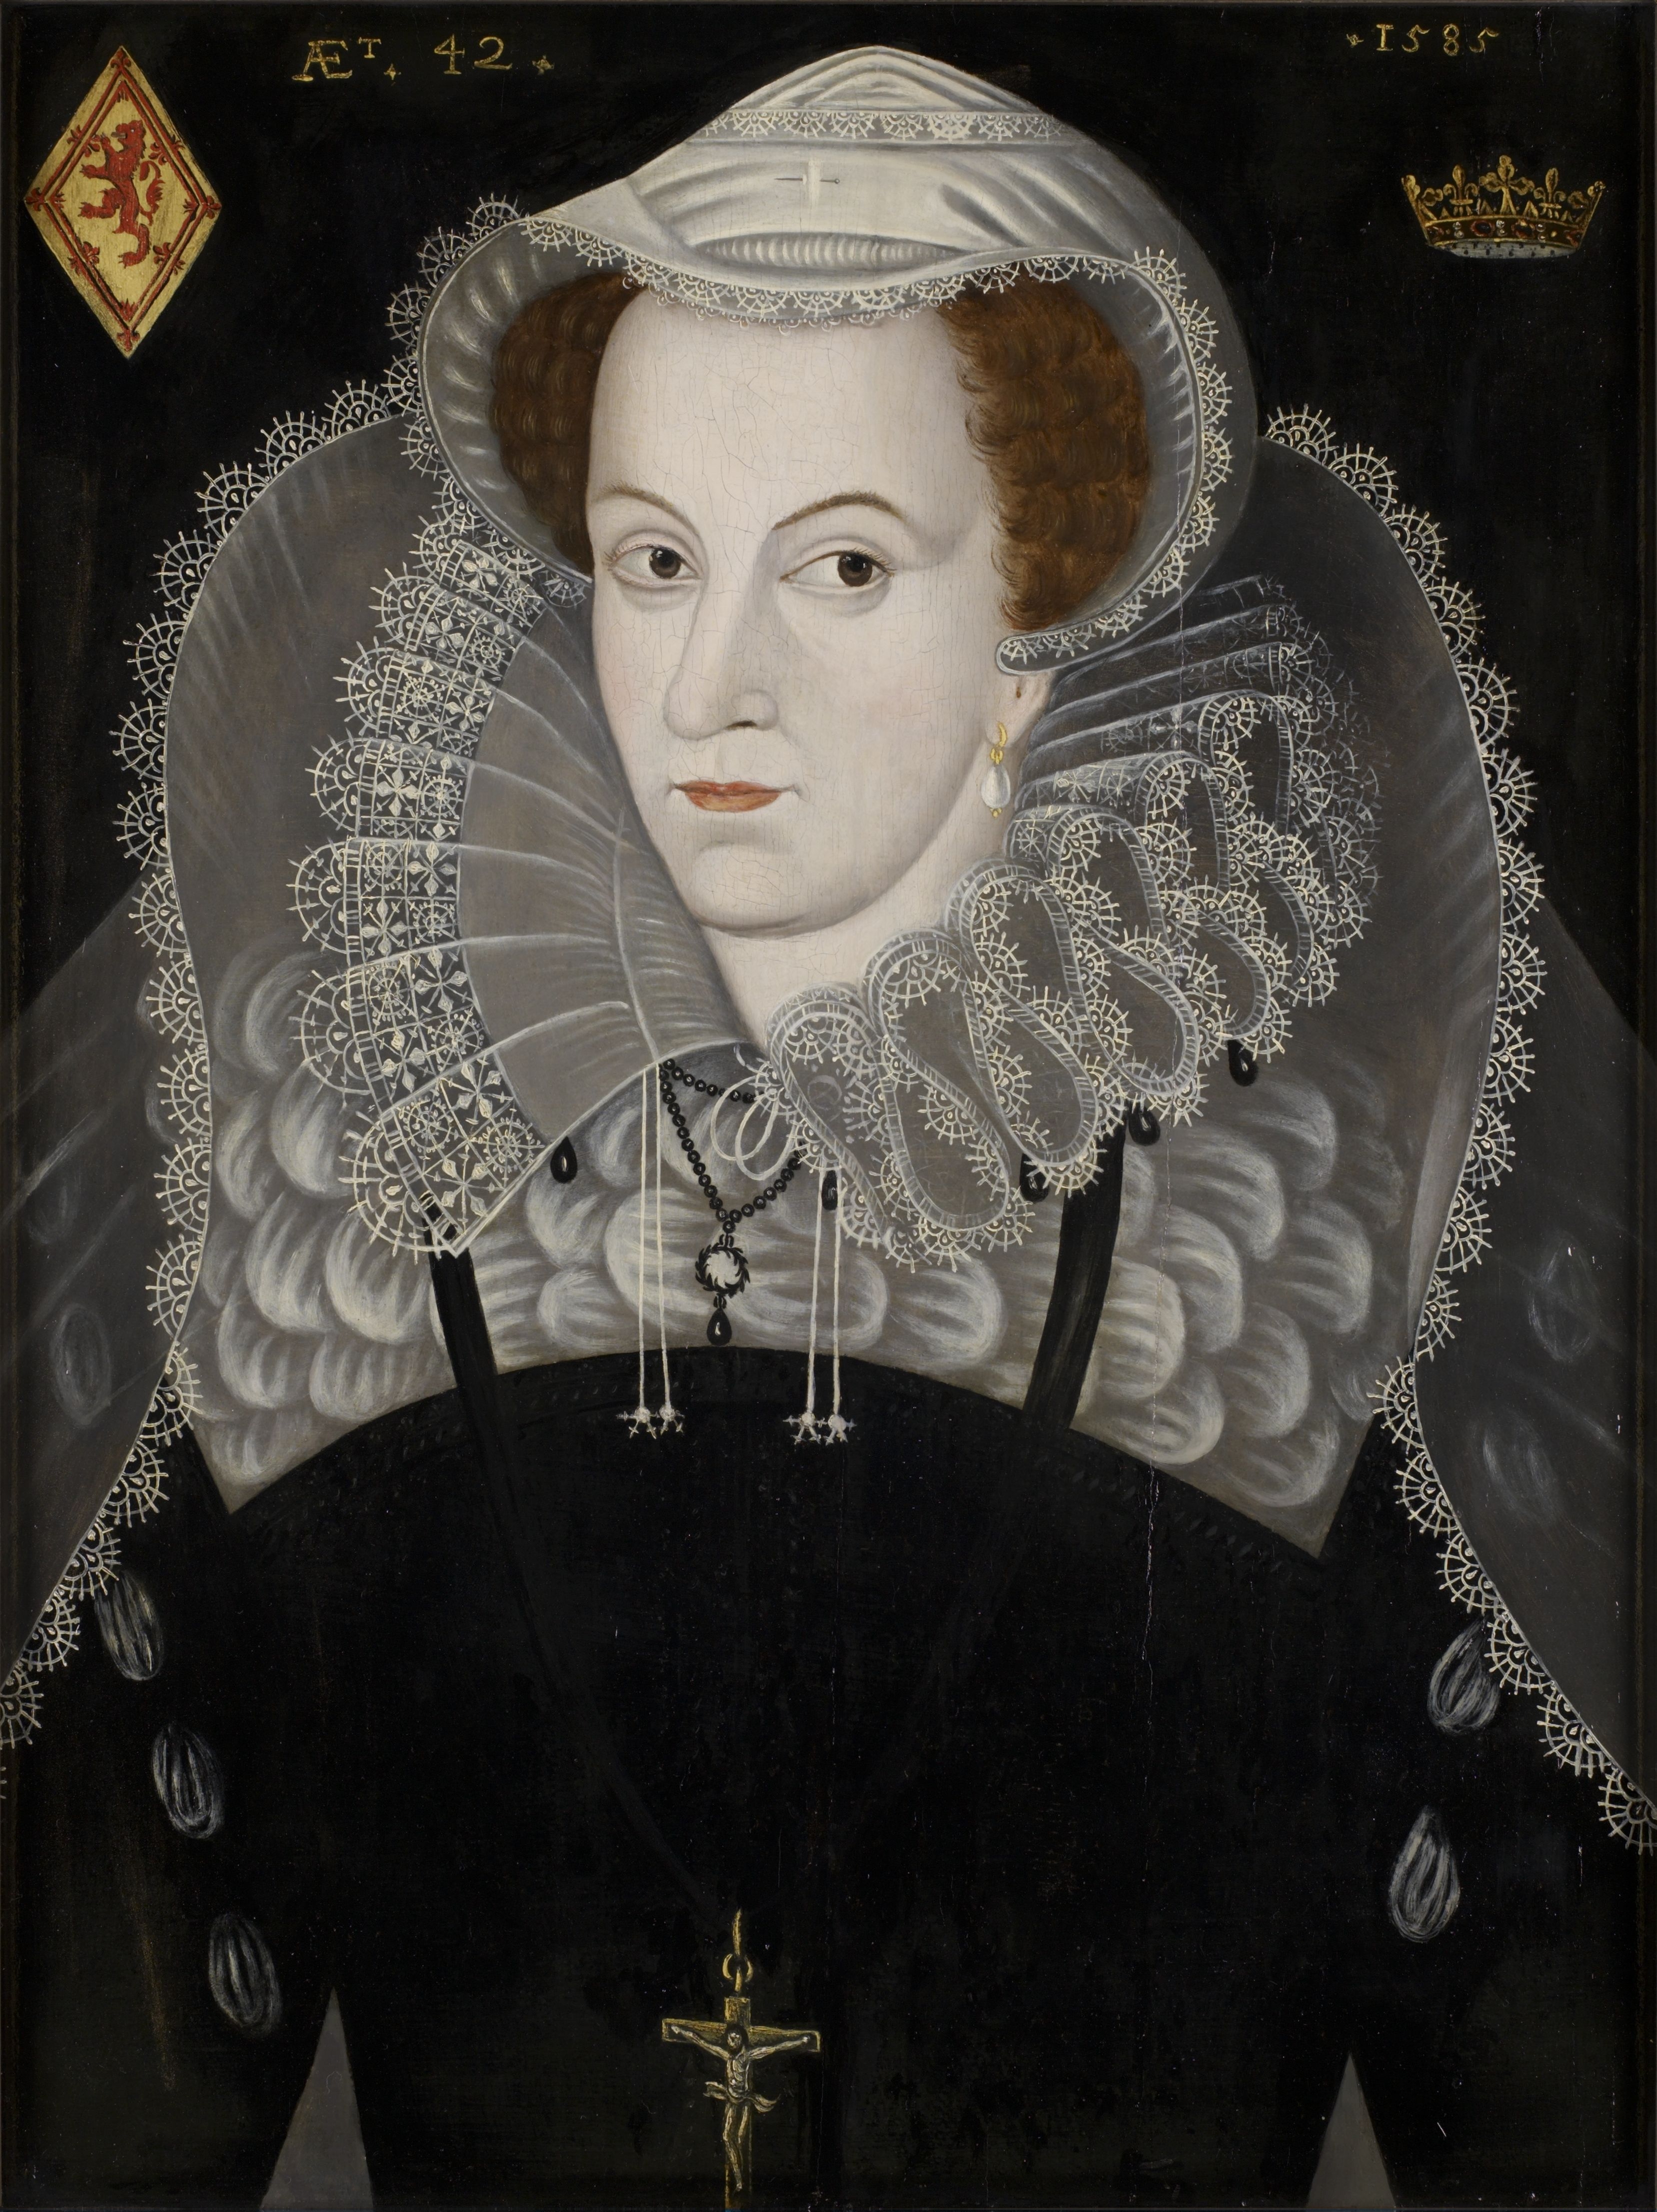 http://upload.wikimedia.org/wikipedia/commons/4/4a/Mary_I_Queen_of_Scots.jpg